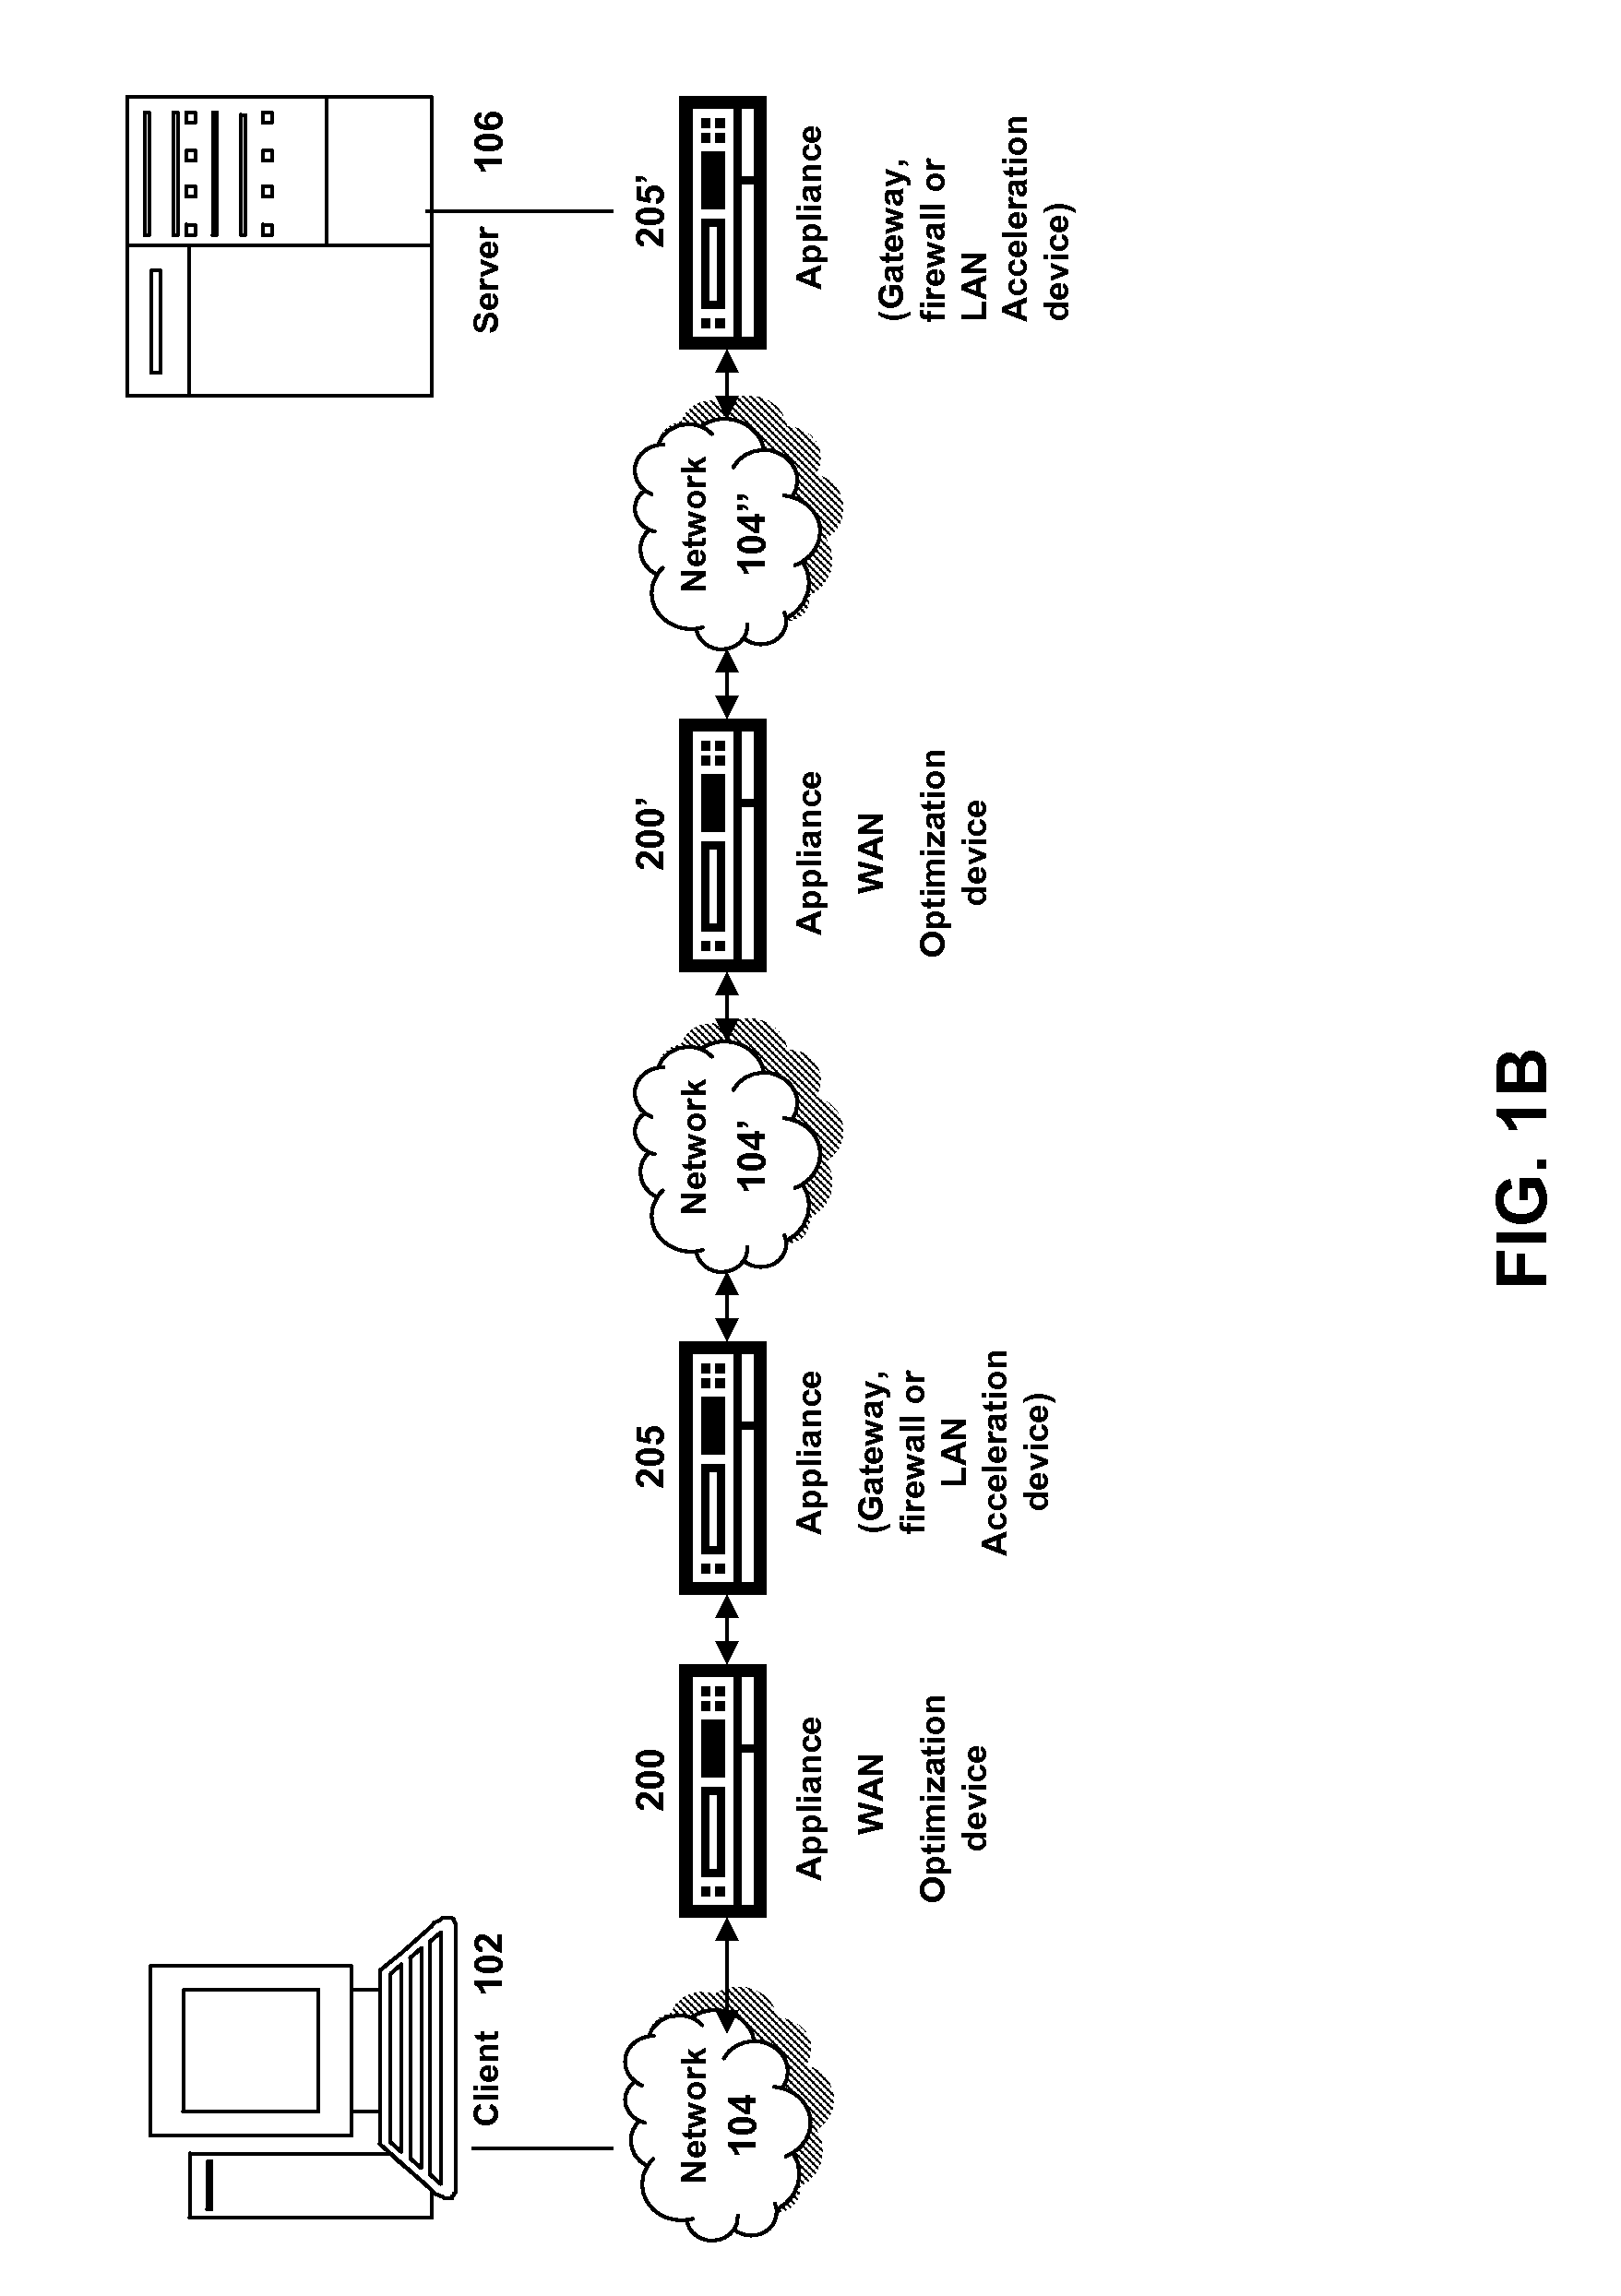 Systems and methods of clustered sharing of compression histories